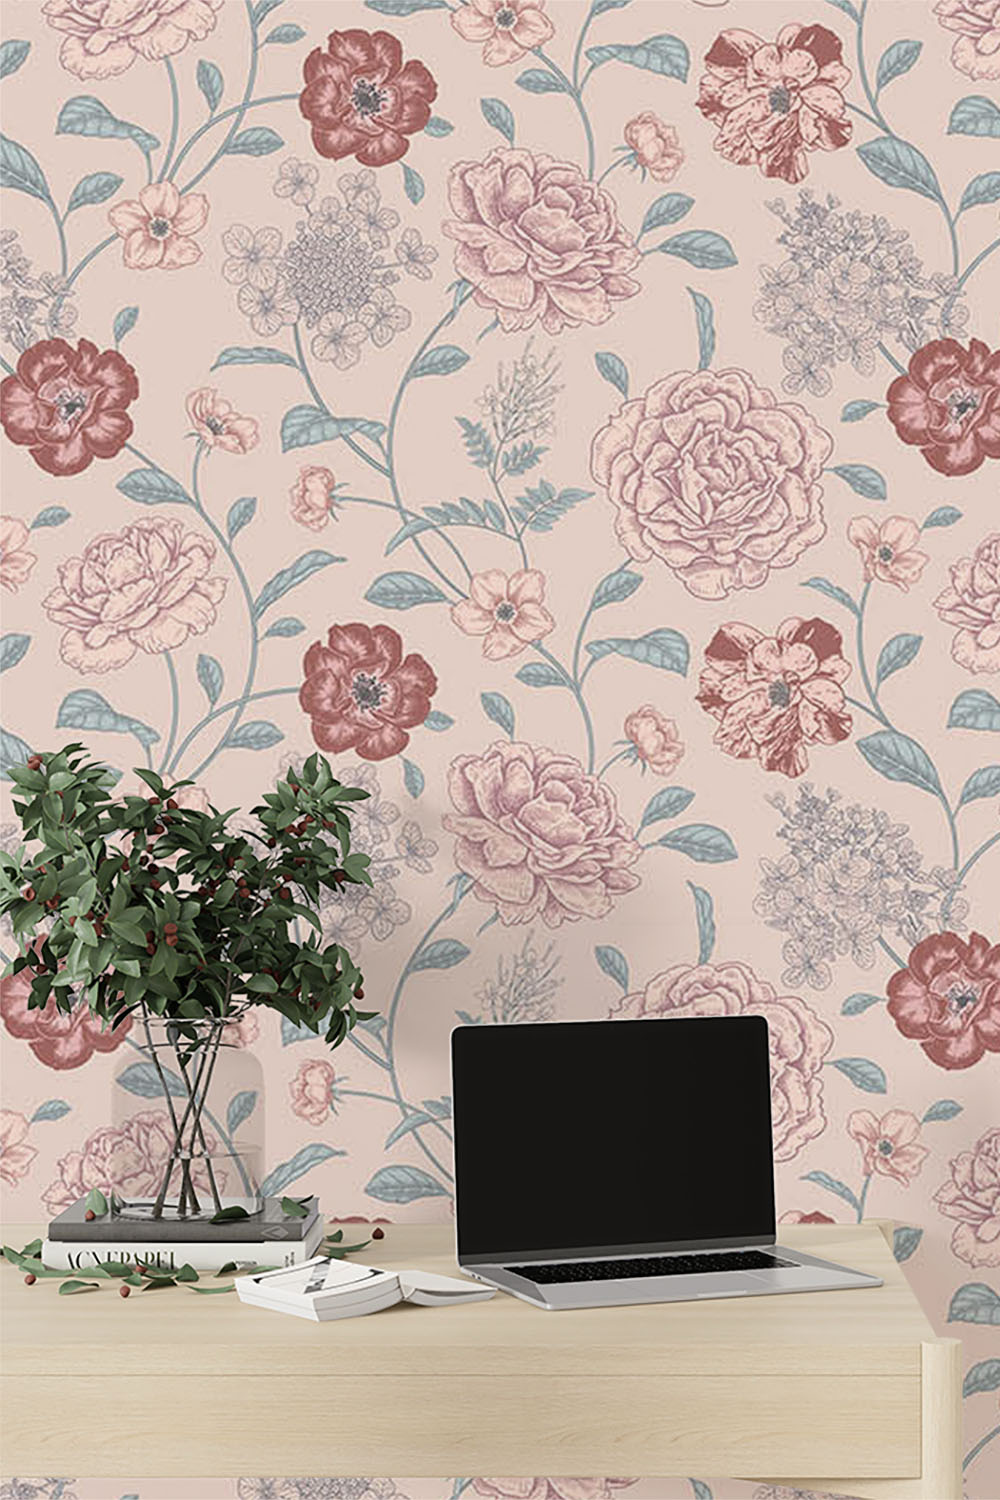 large-and-small-flowers-with-leaves-wallpaper-sample